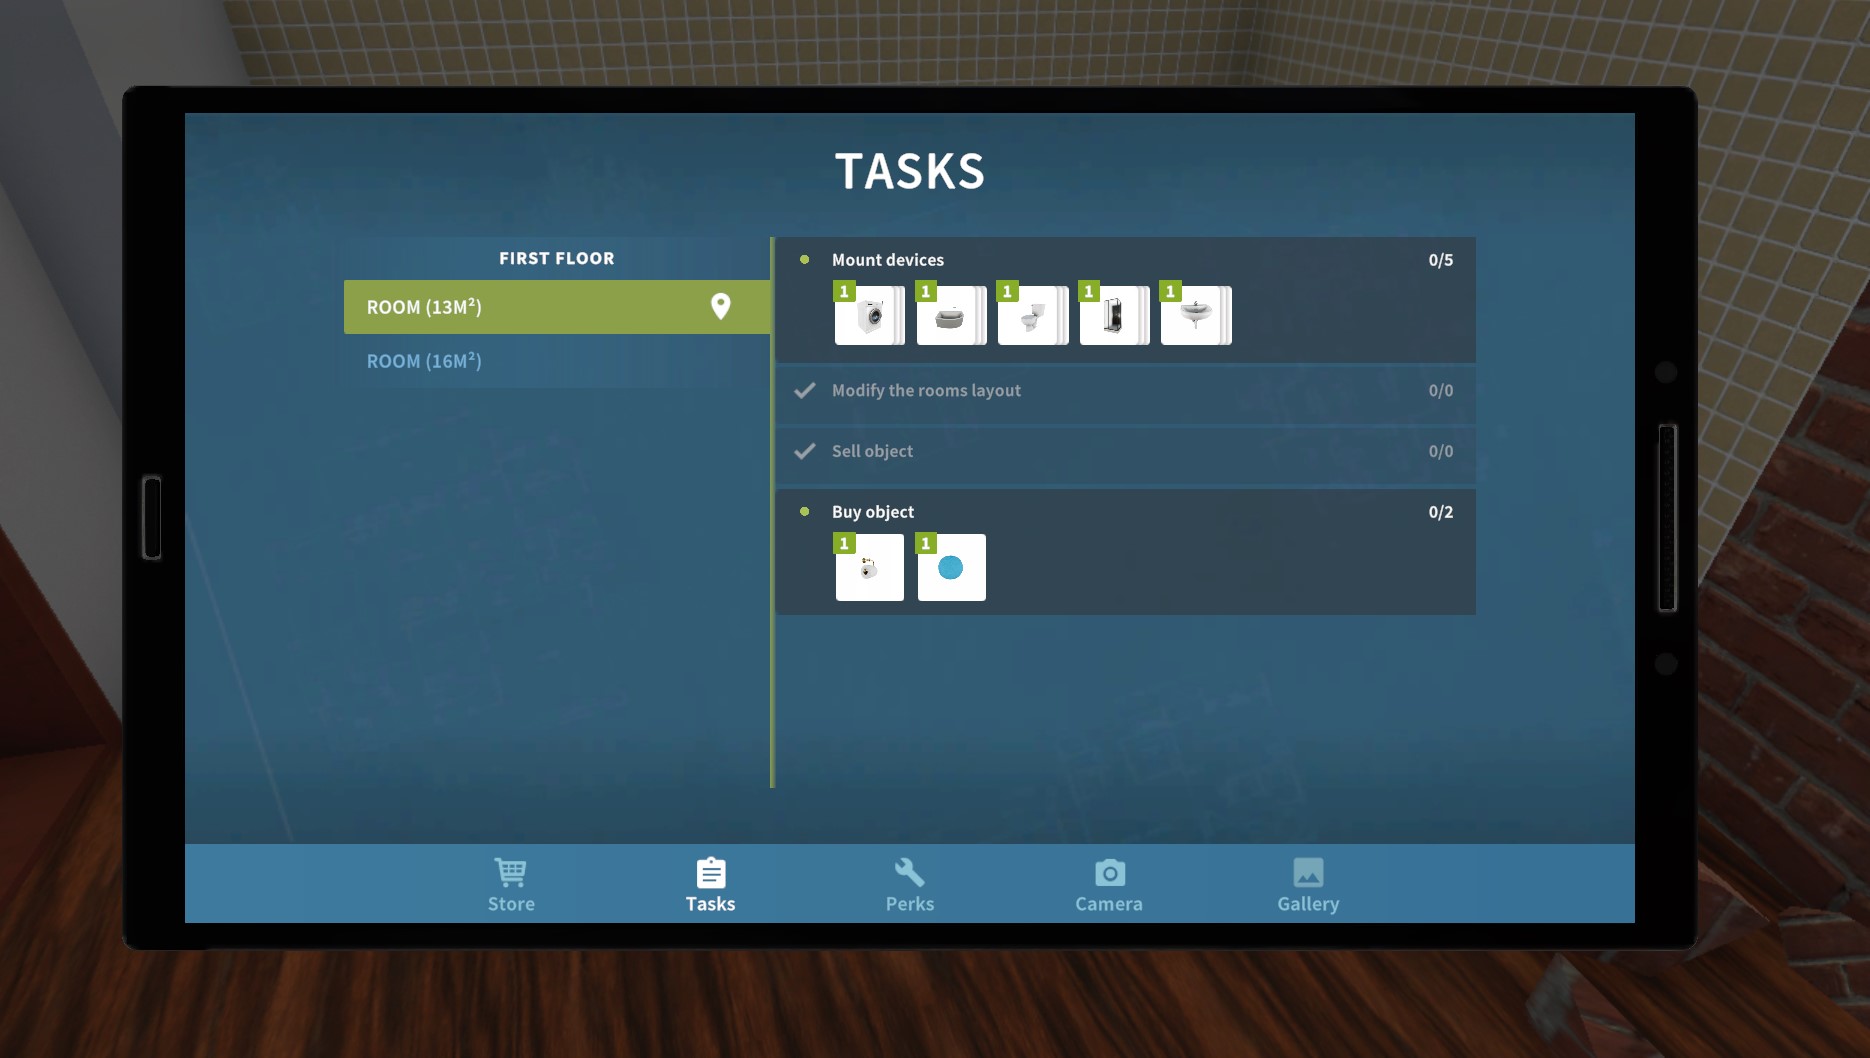 The task menu helps players know what objects they need and what tasks need to be finished.